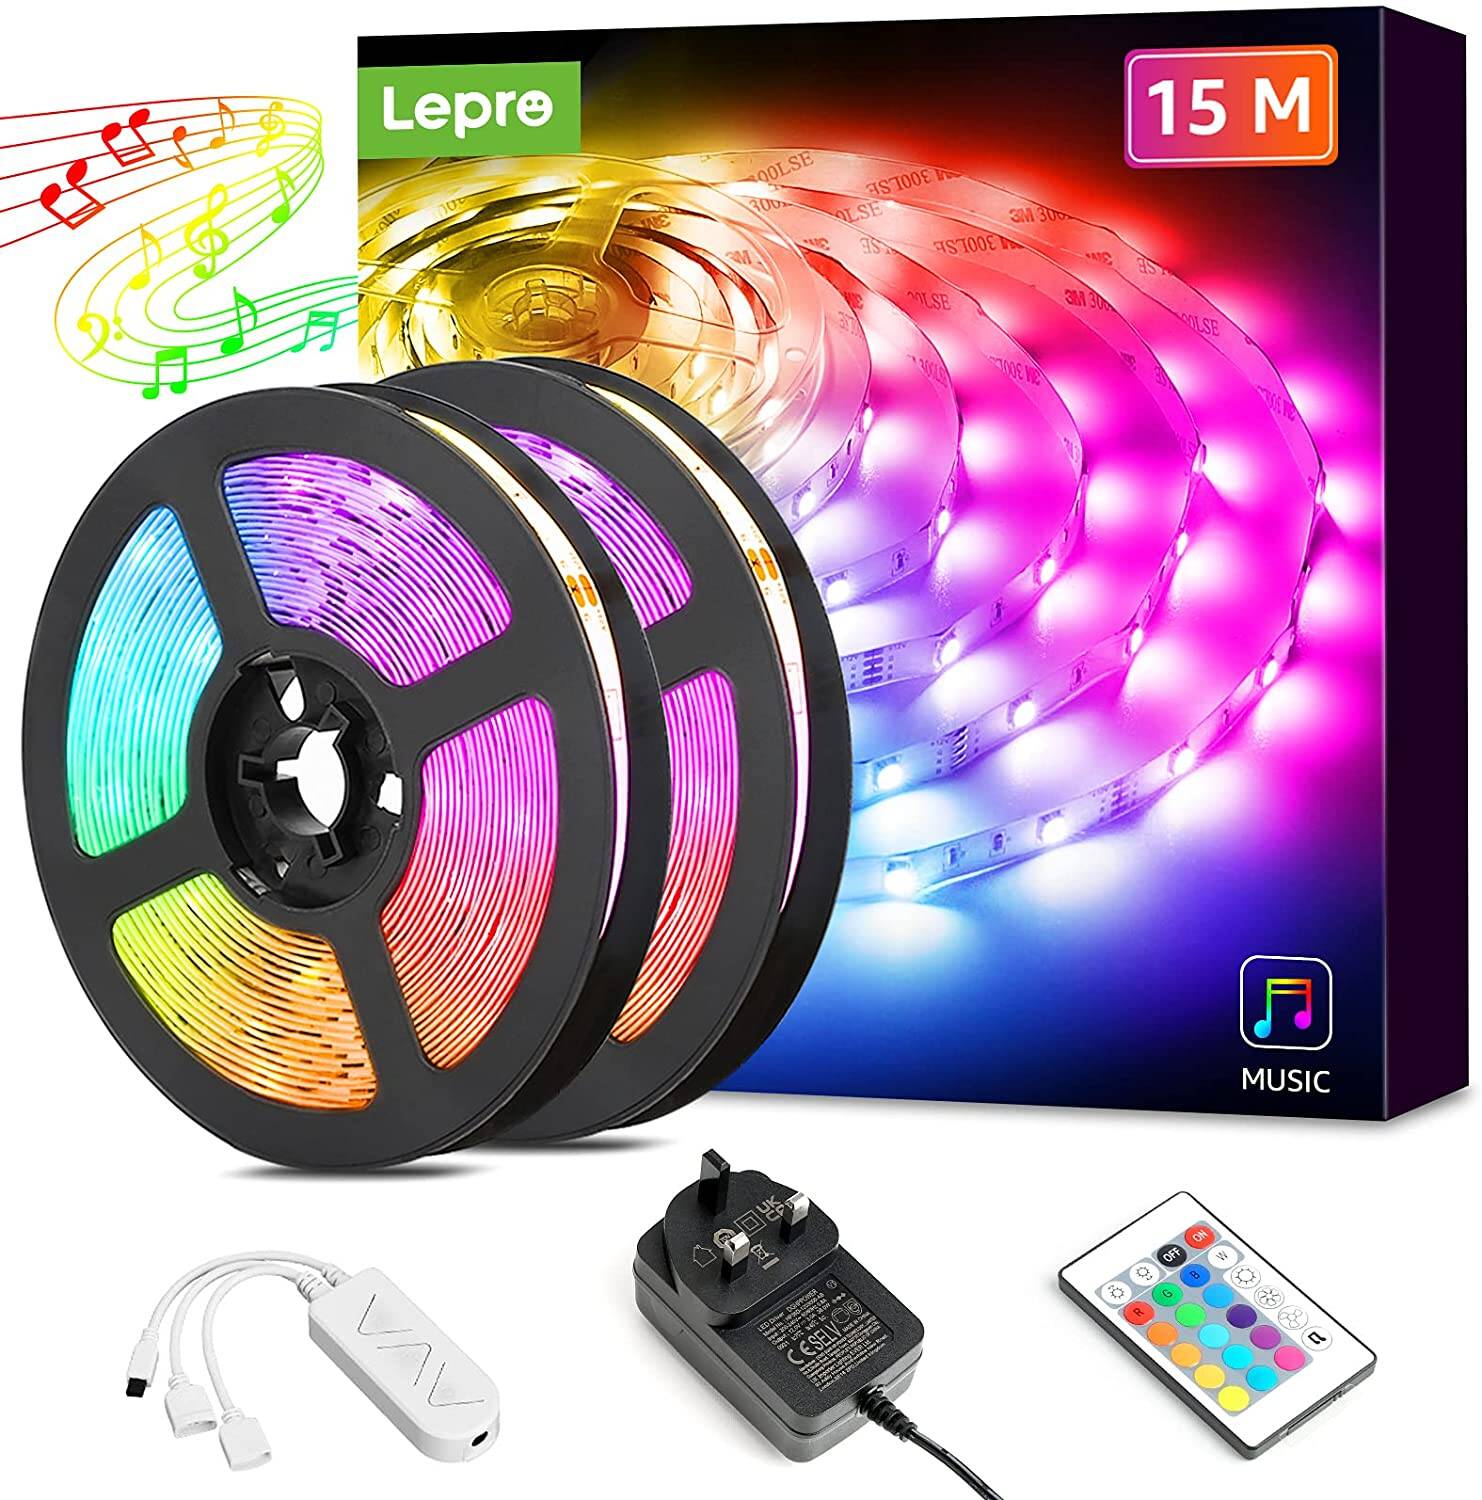 Lepro 15M Music Sync Strip Sensitive Built-in Mic, Colour Changing & Dimmable with Remote, RGB Lights for Bedroom, Party Decoration (2x7.5M, Stick-on, Plug-n-Play)